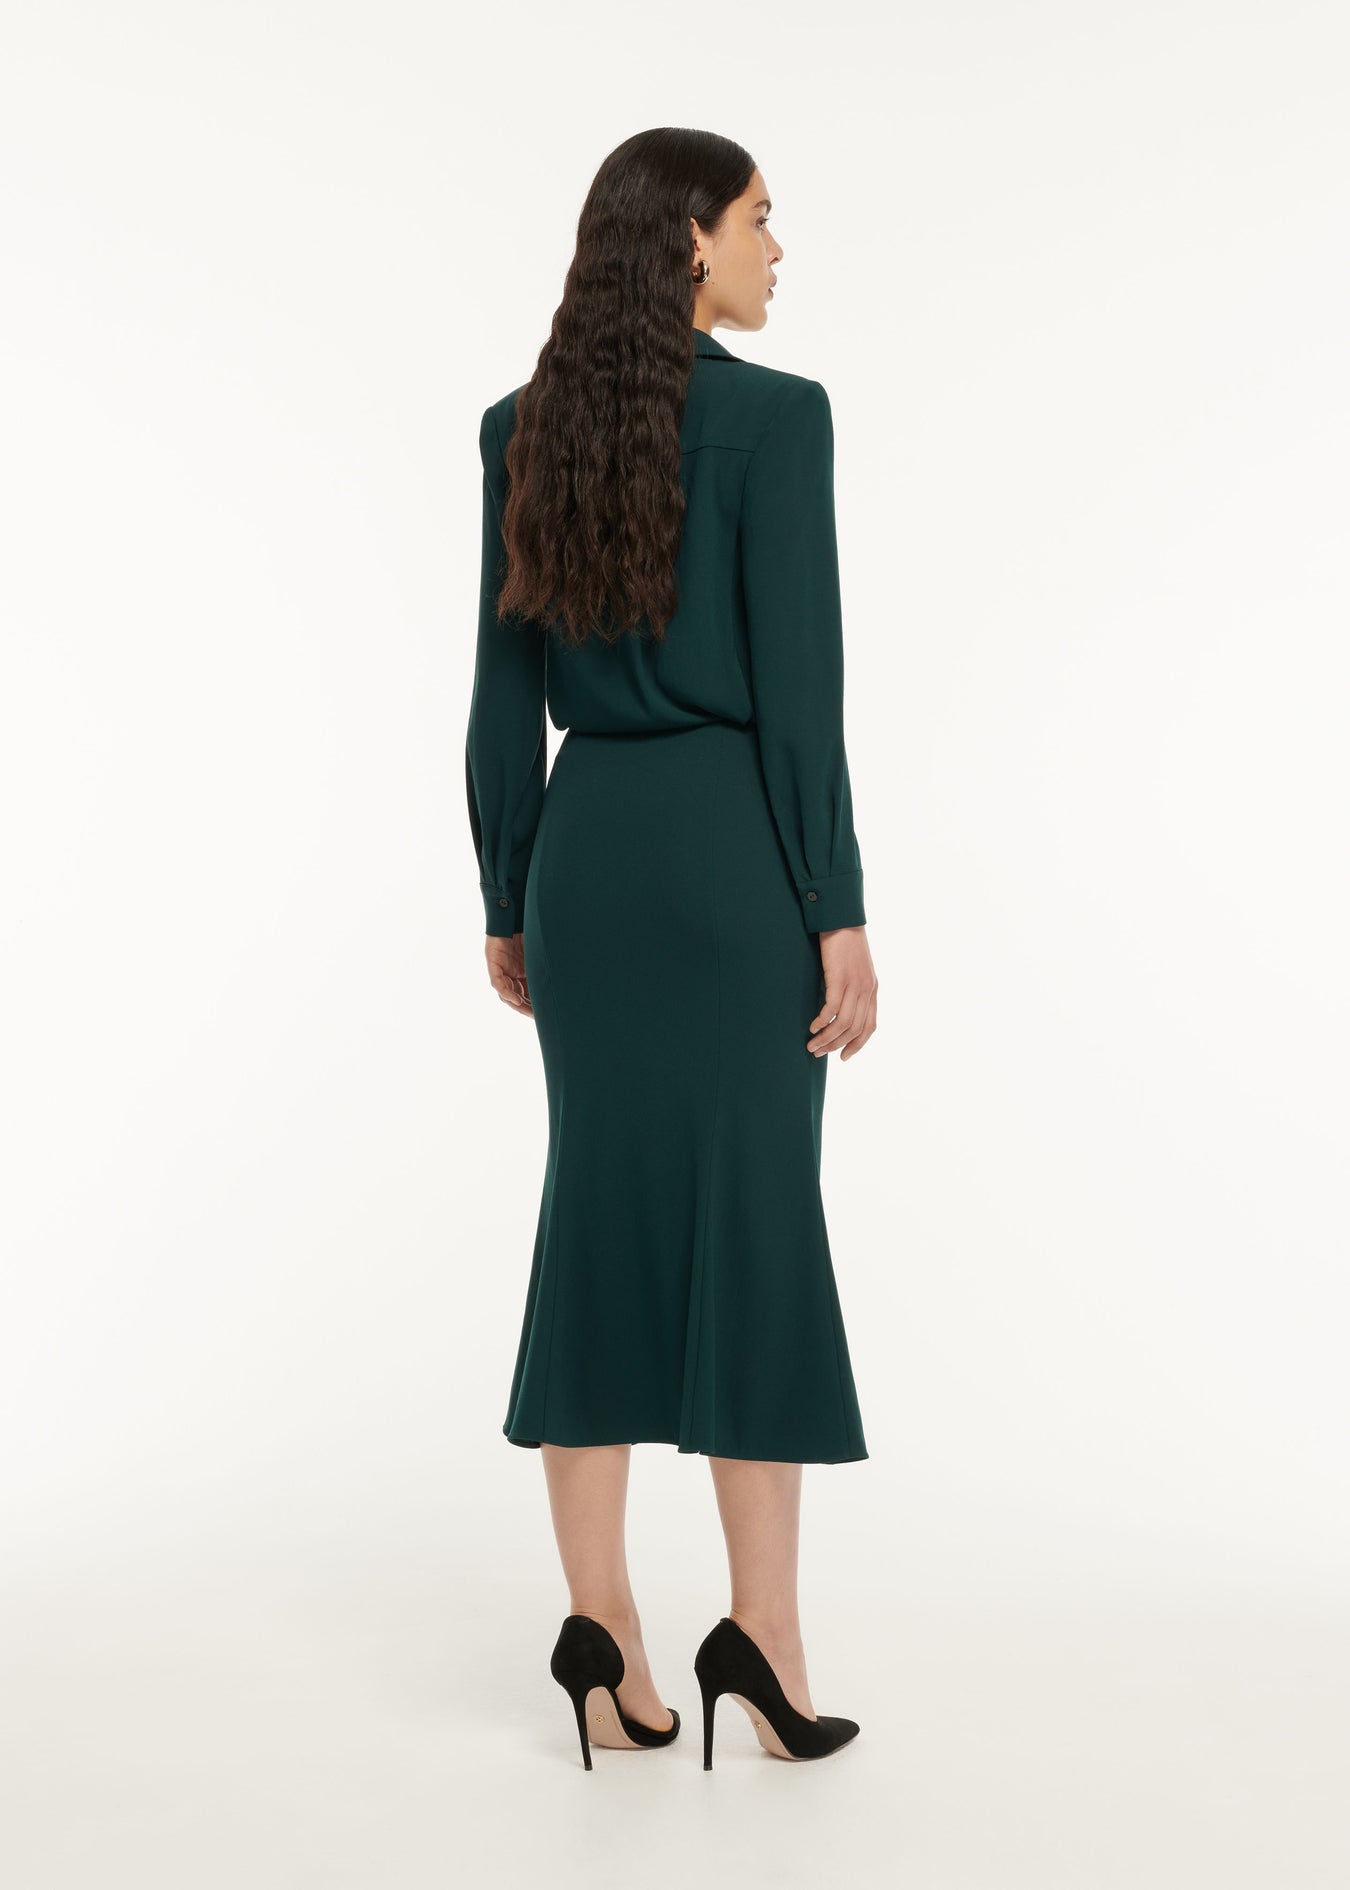 The back of a woman wearing the Long Sleeve Crepe Midi Dress